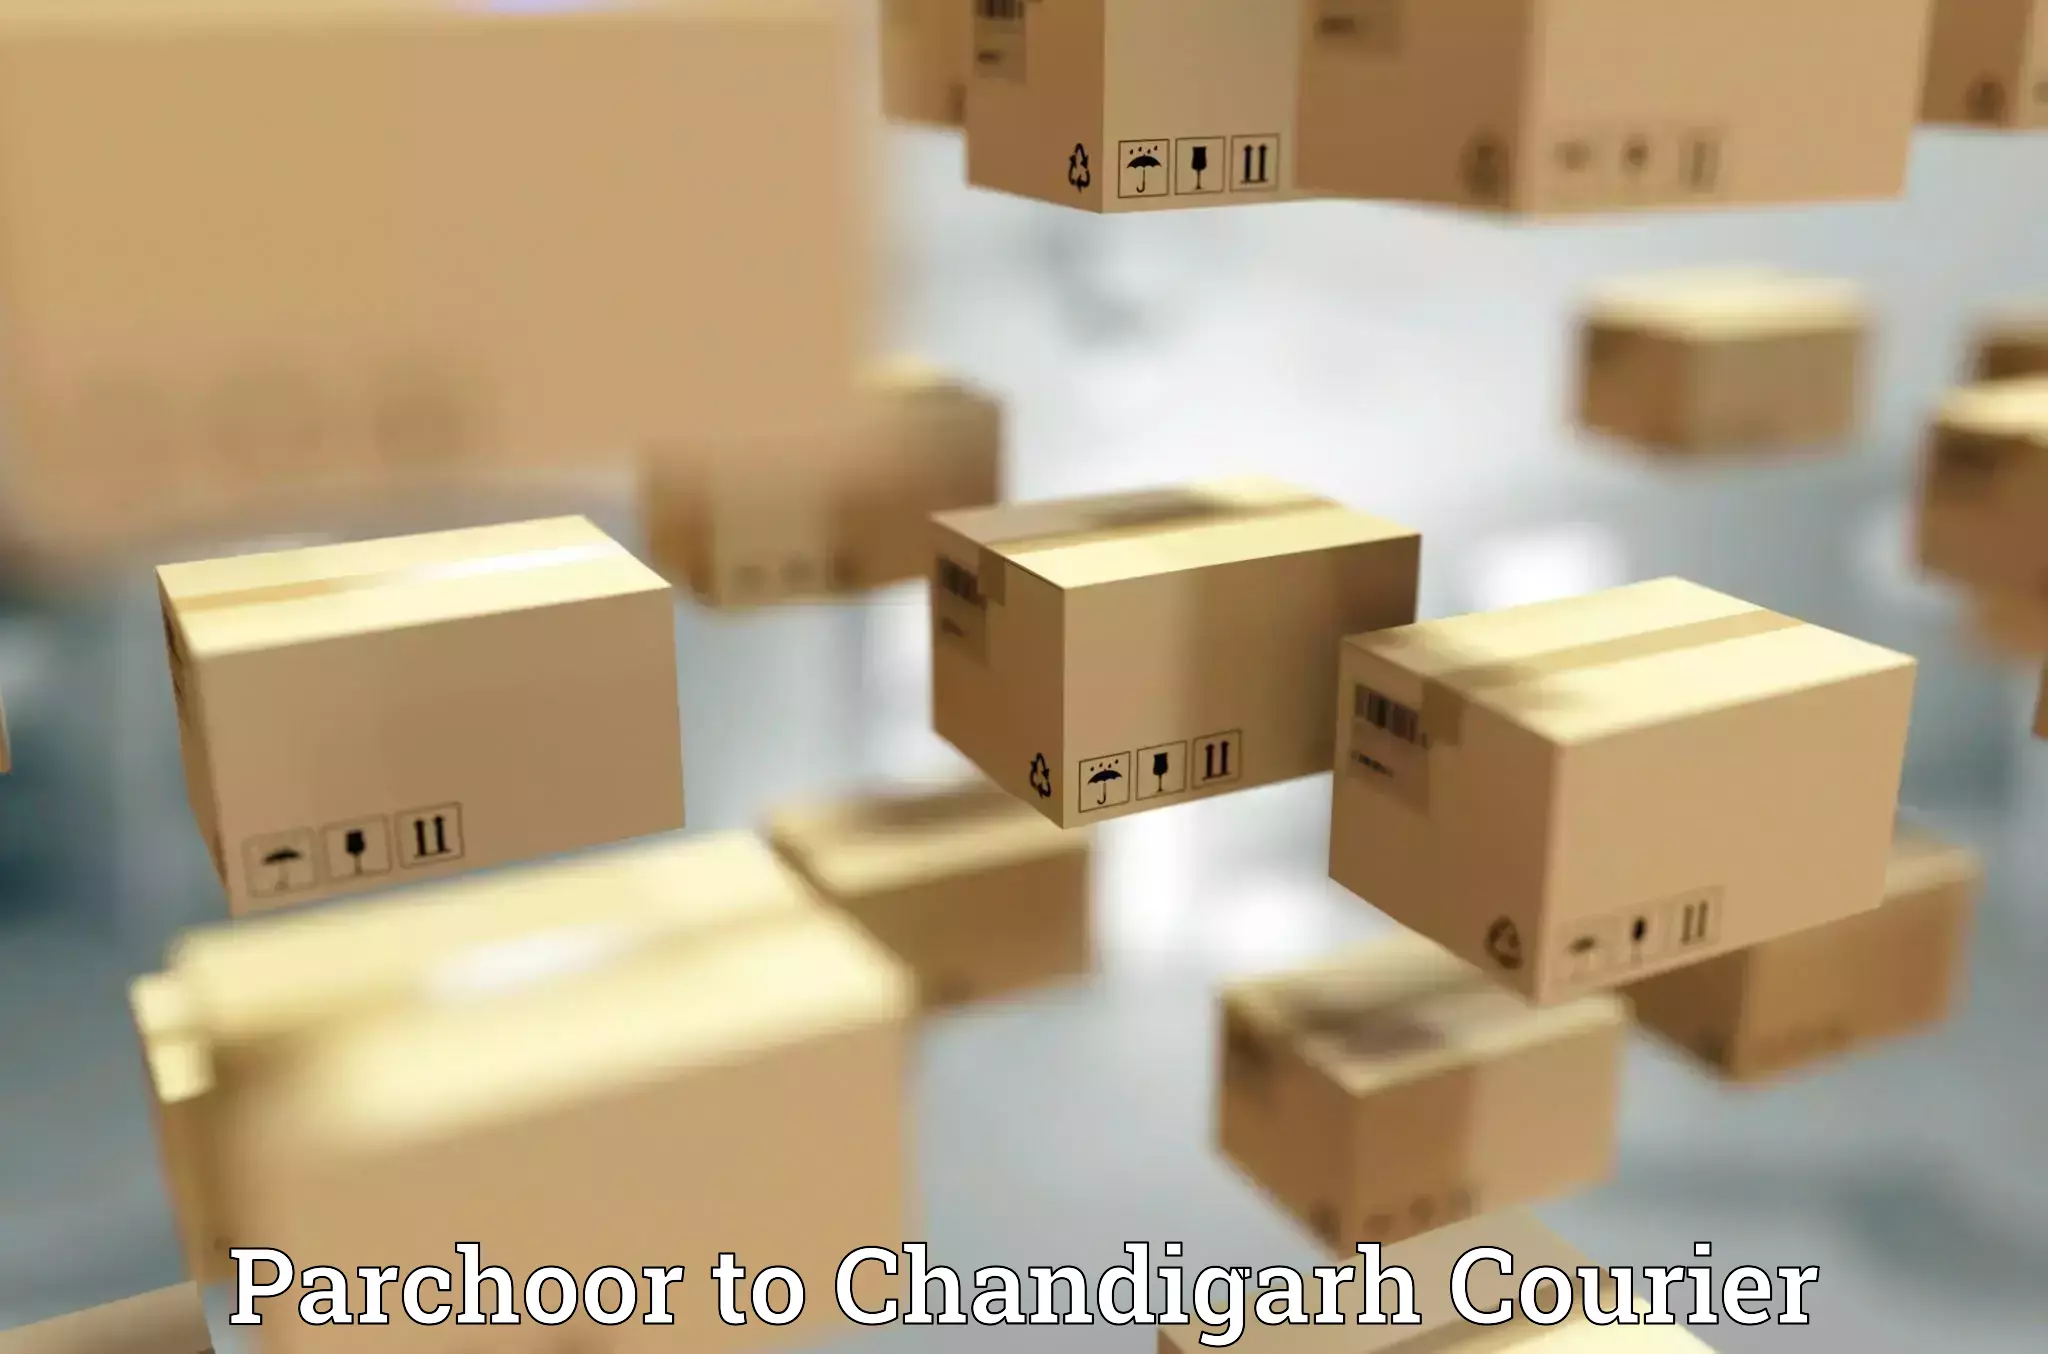 Quality courier partnerships Parchoor to Chandigarh